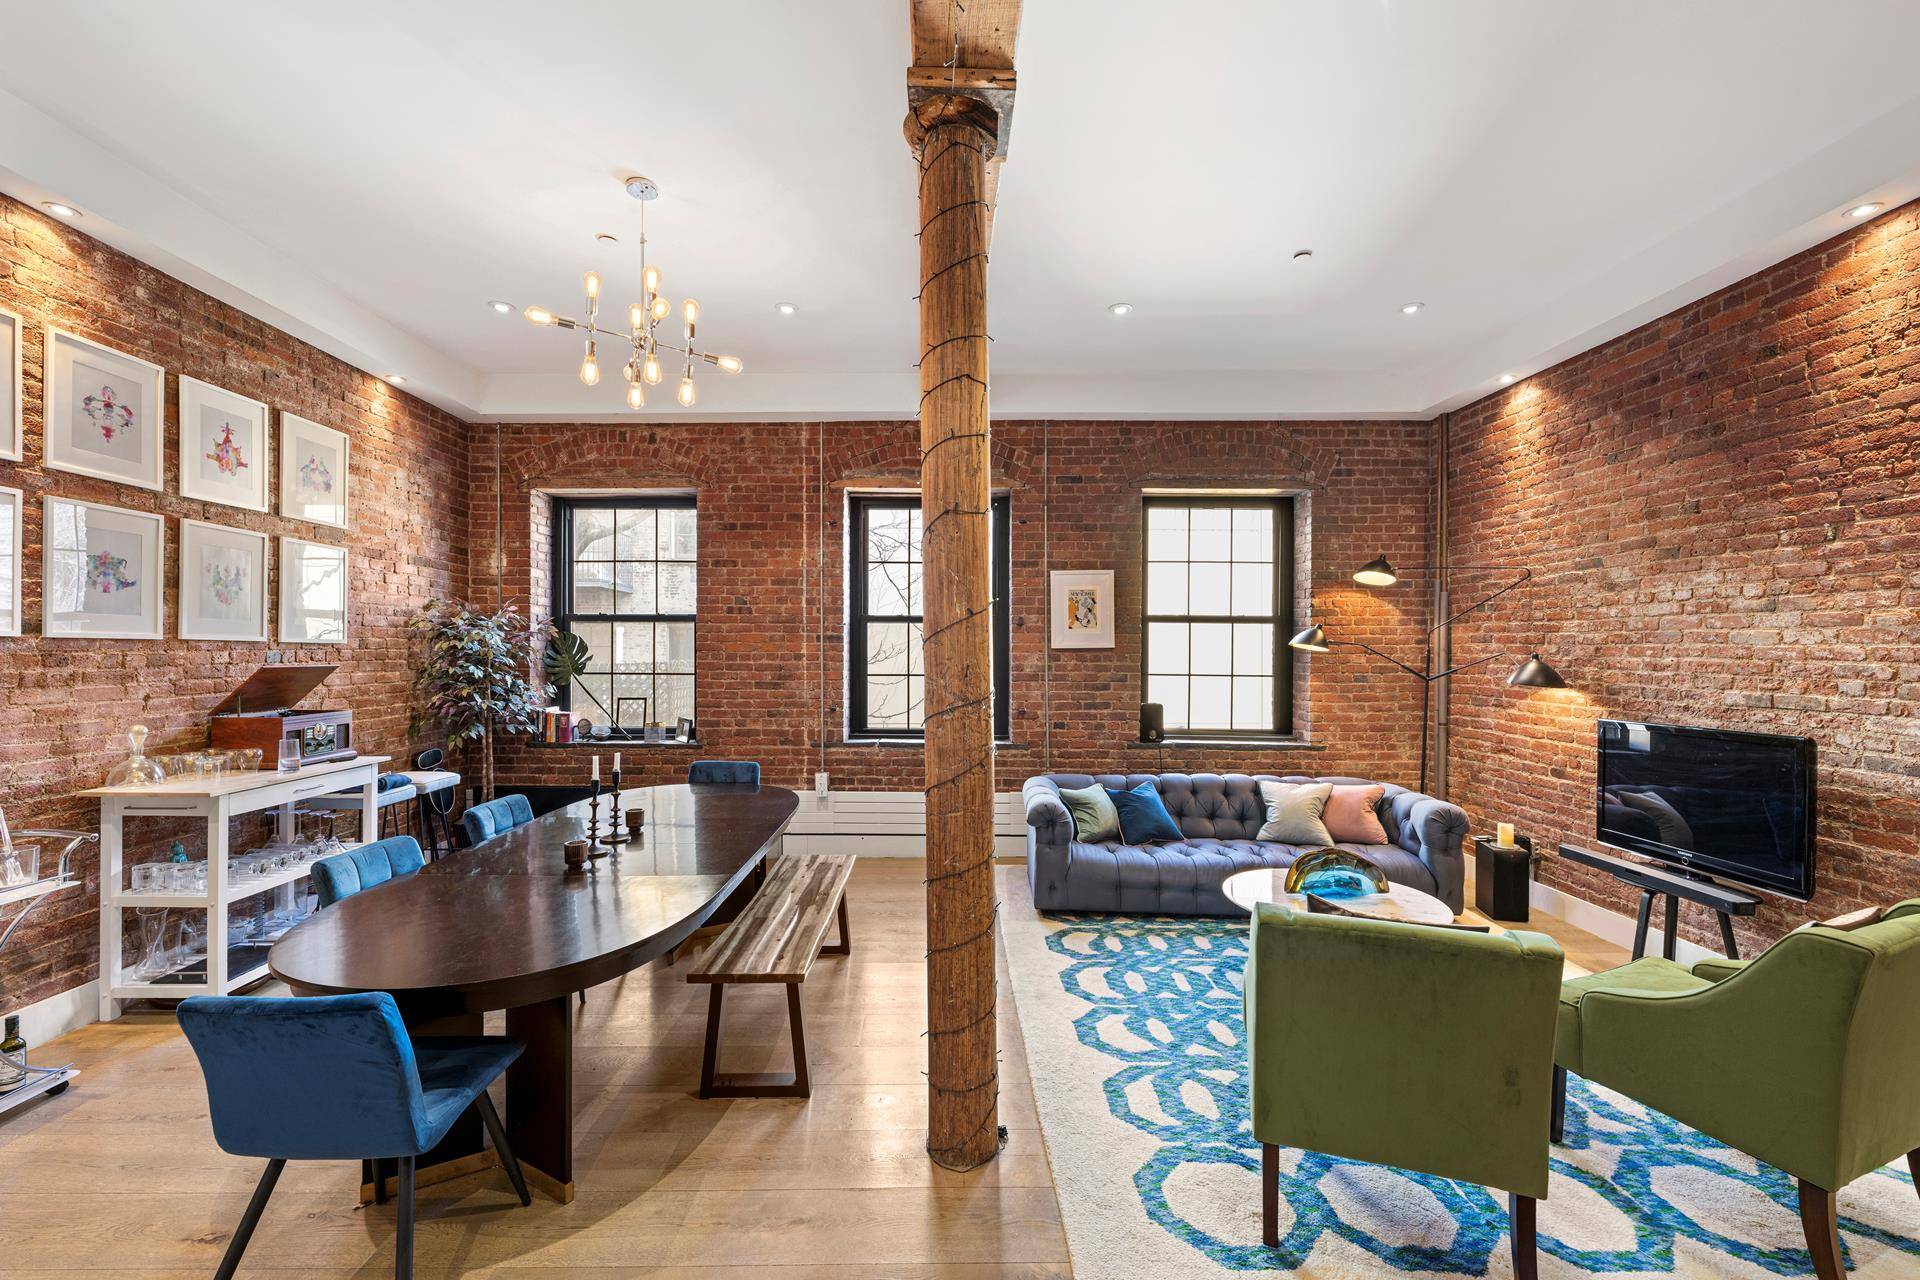 Mint condition historic condominium loft in the historic Seaport with high ceilings, wide plank hardwood floors, exposed brick, hewn wood beams and timber columns.